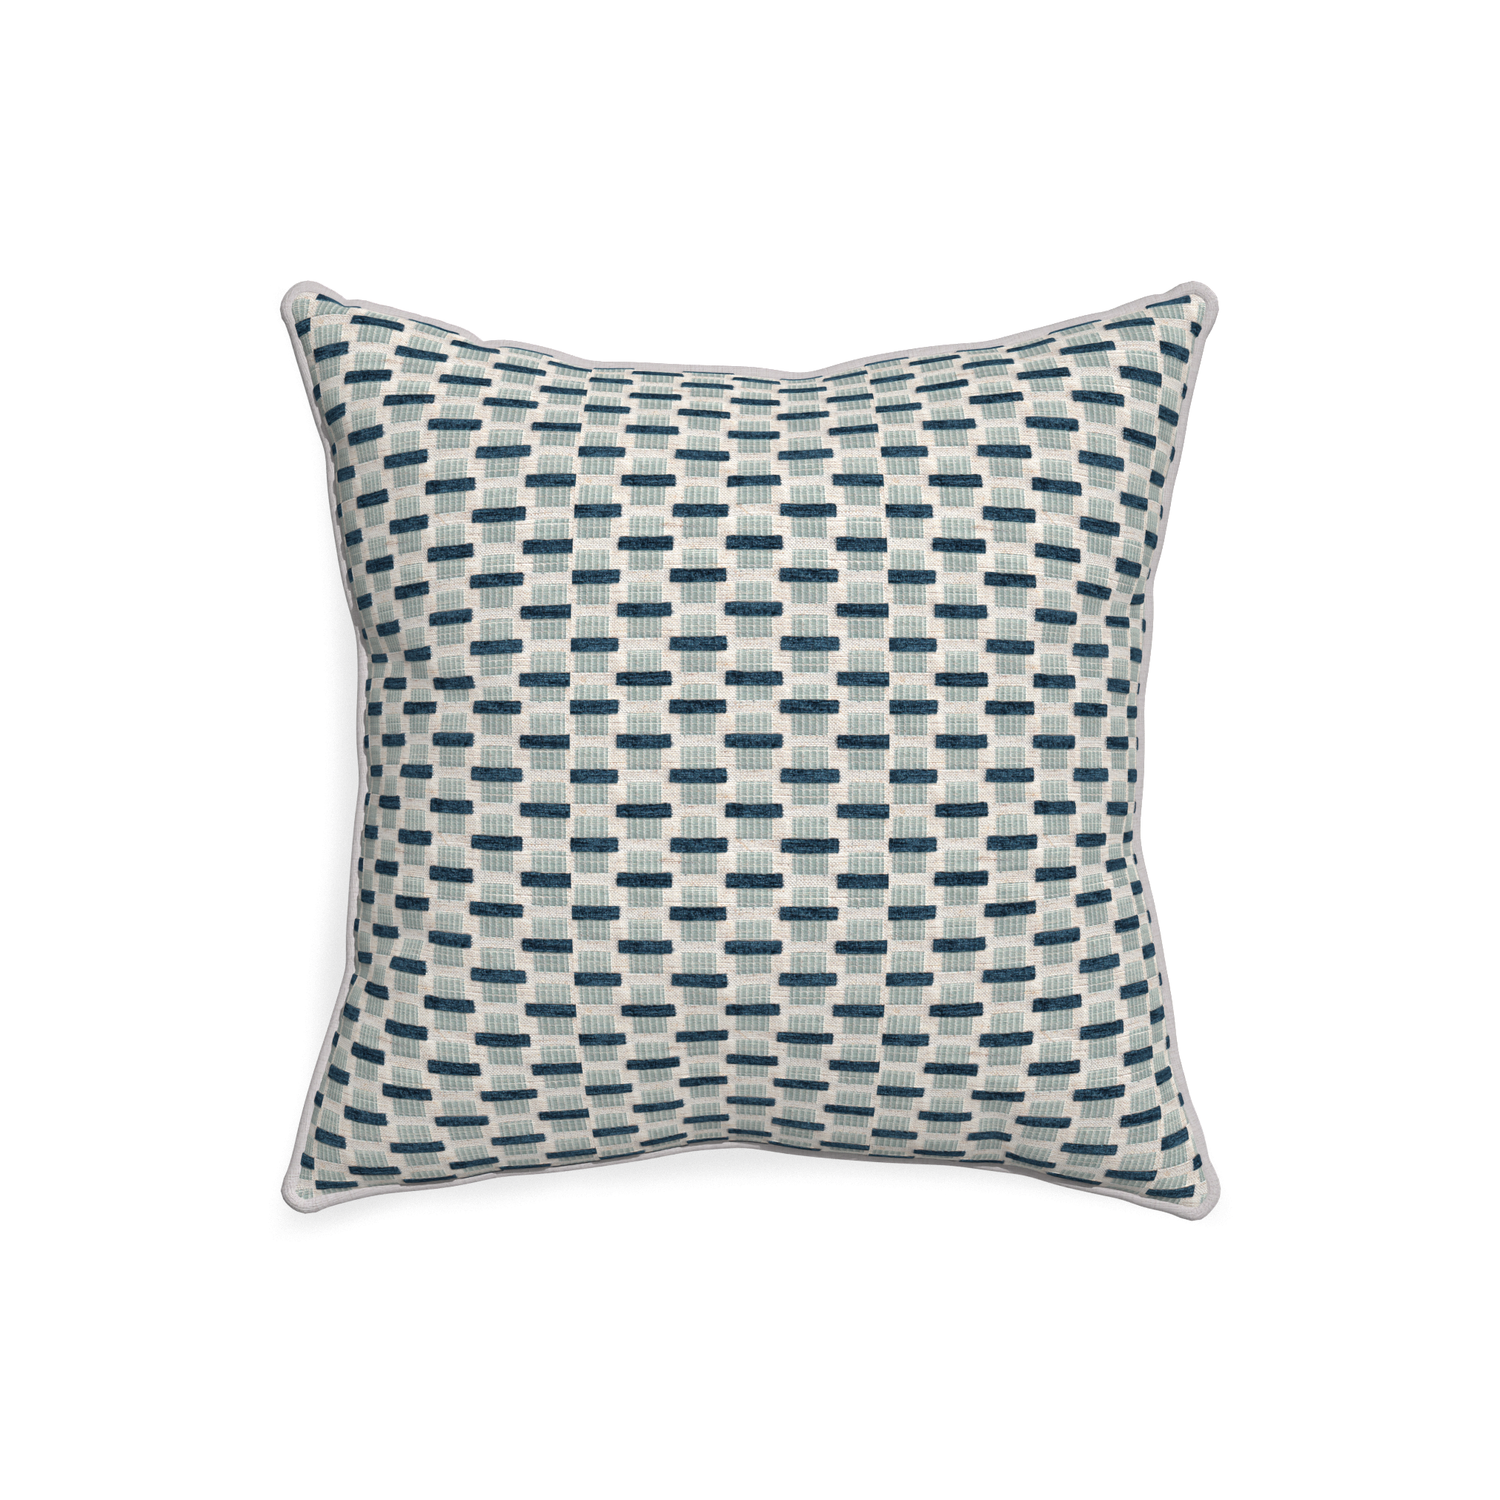 20-square willow amalfi custom blue geometric chenillepillow with pebble piping on white background